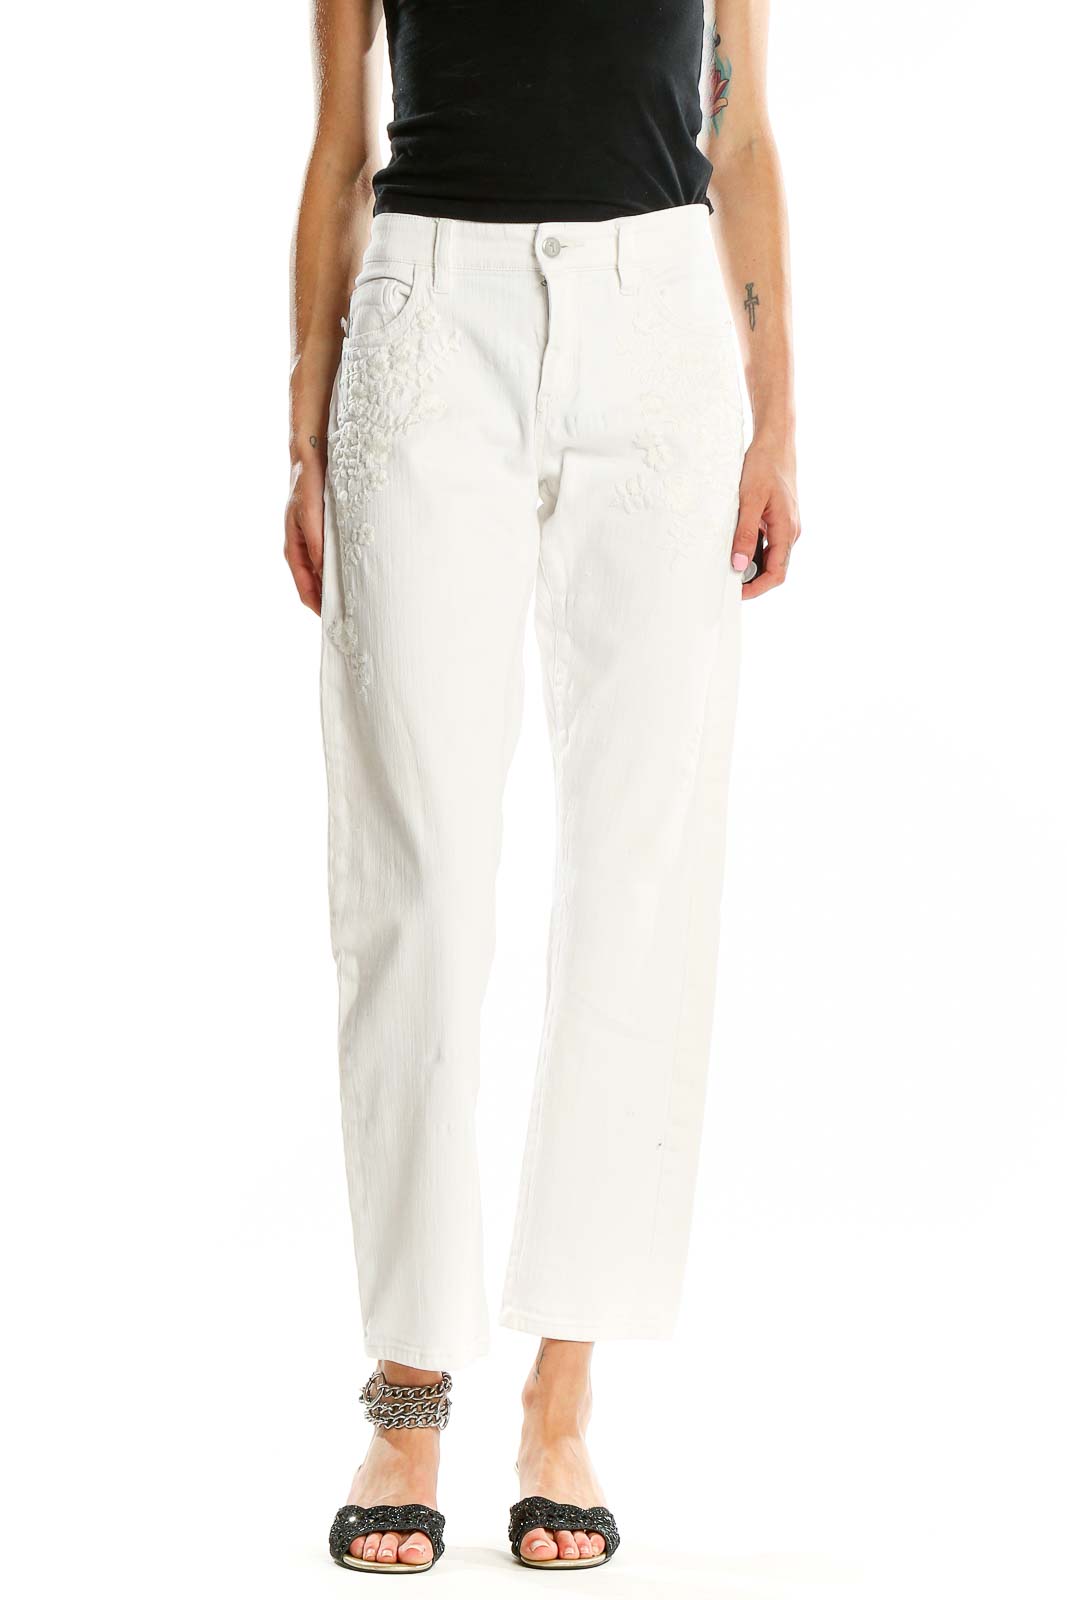 White Embroidered Boyfriend Jeans Front